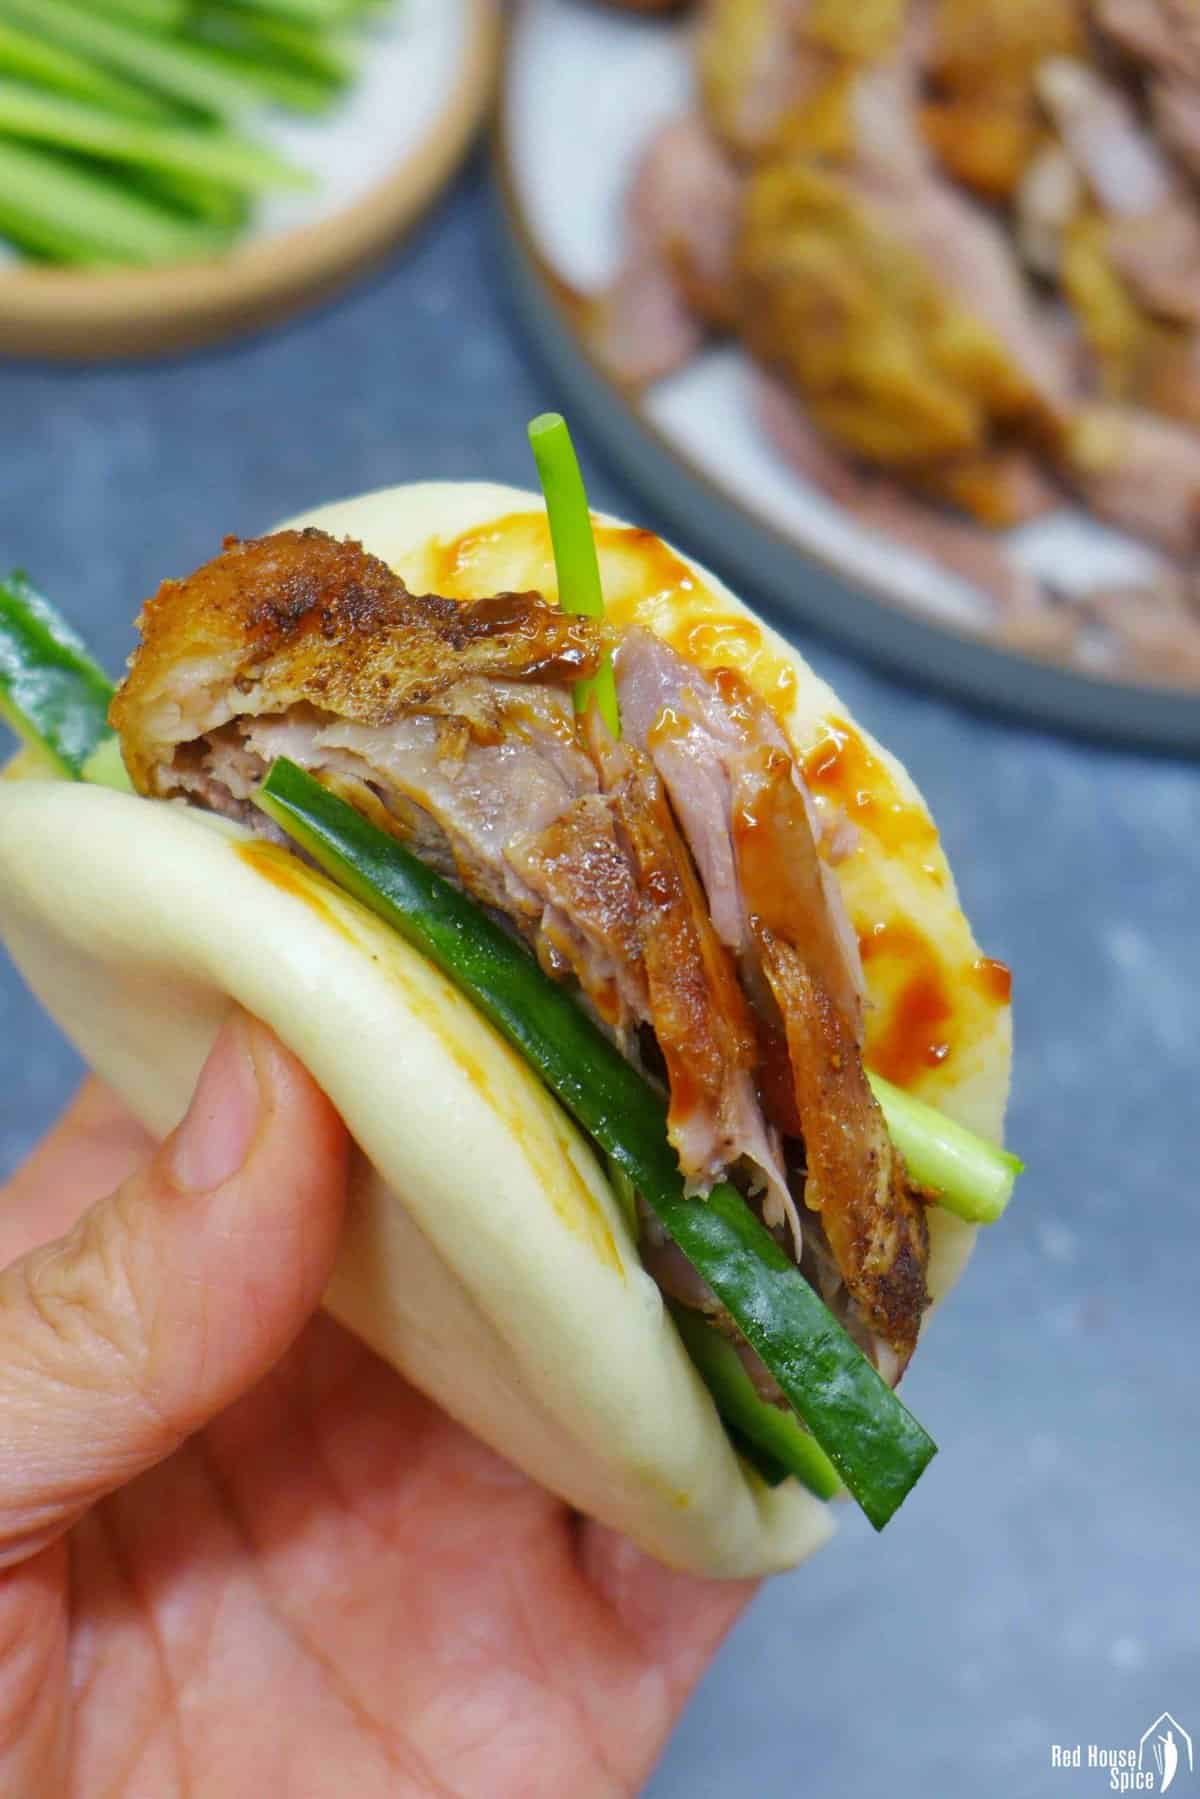 A steamed bao bun stuffed with duck, cucumber, scallions and sauces.